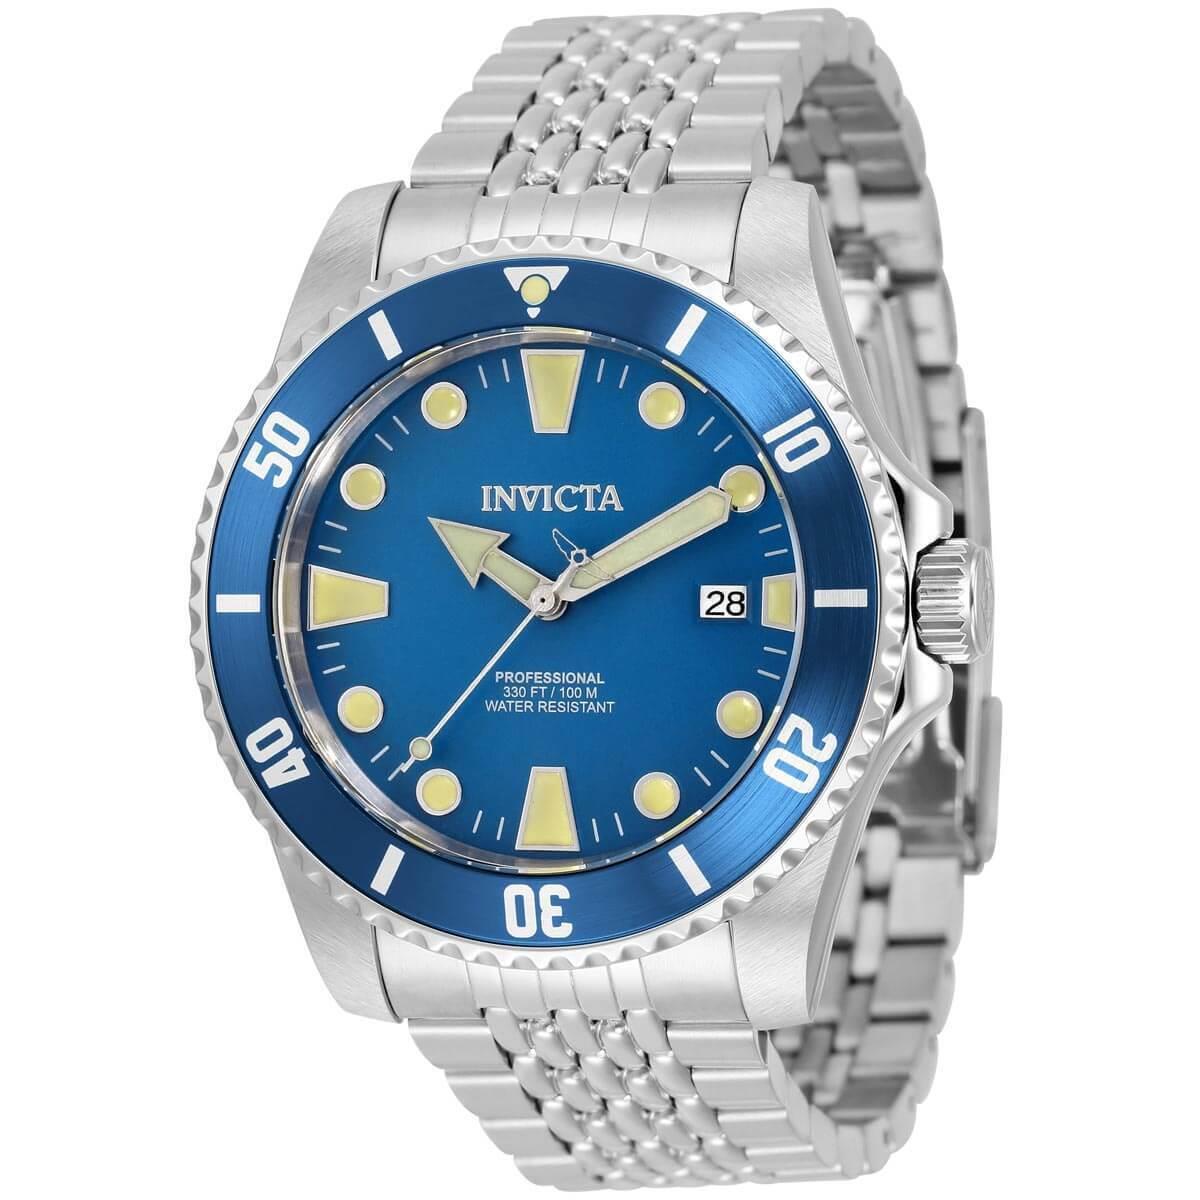 Invicta Men`s Watch Automatic Pro Diver Blue Dial Stainless Steel Bracelet 33503